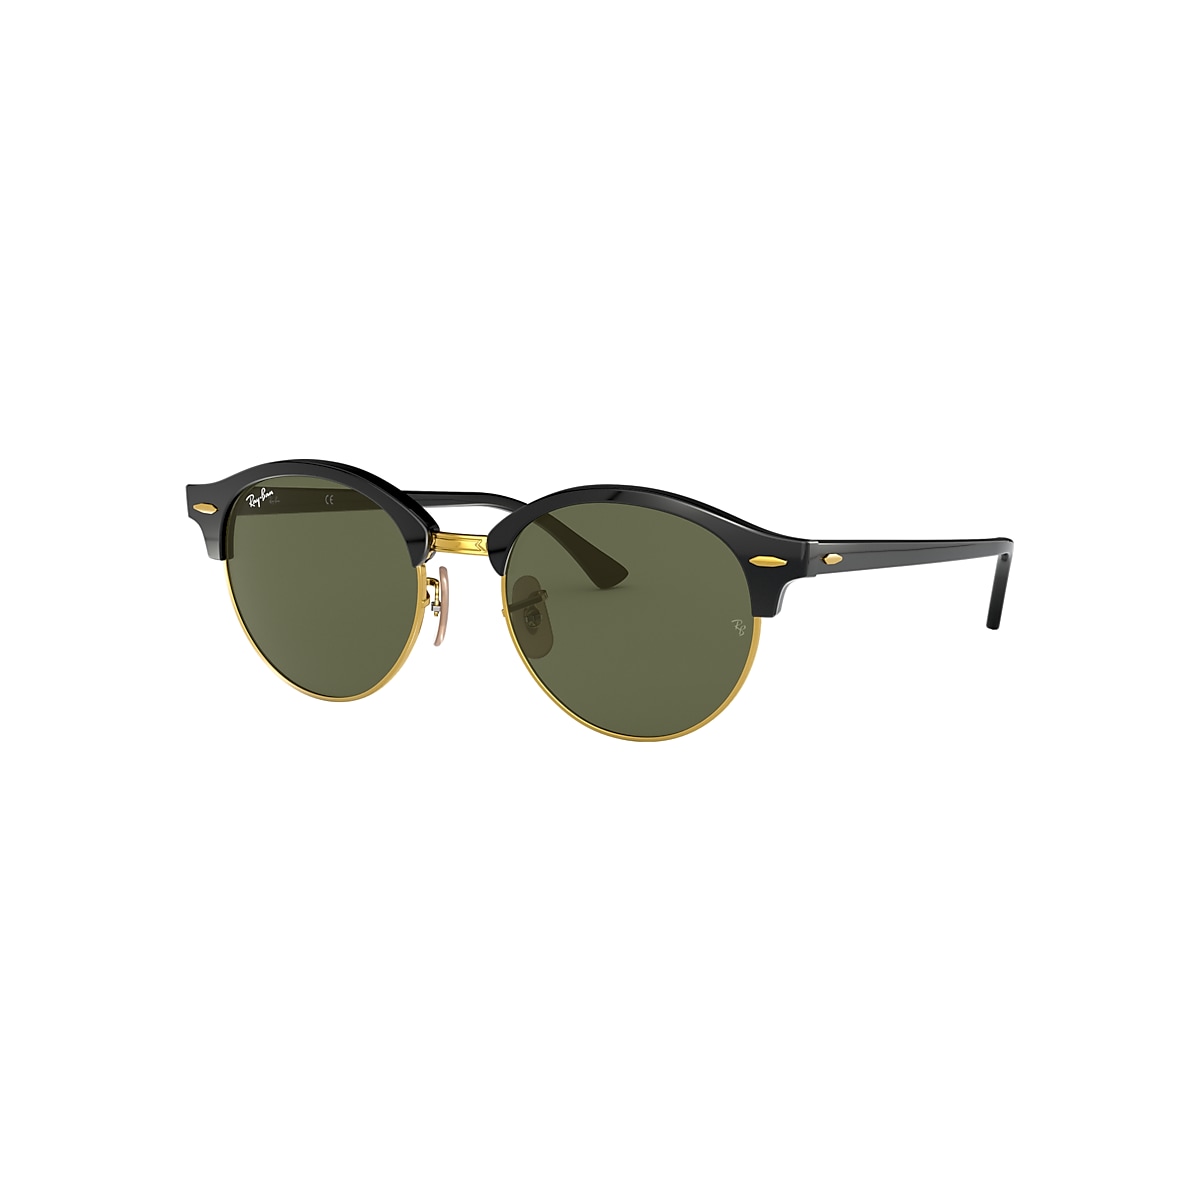 CLUBROUND CLASSIC Sunglasses in Black and Green - RB4246 | Ray-Ban® US